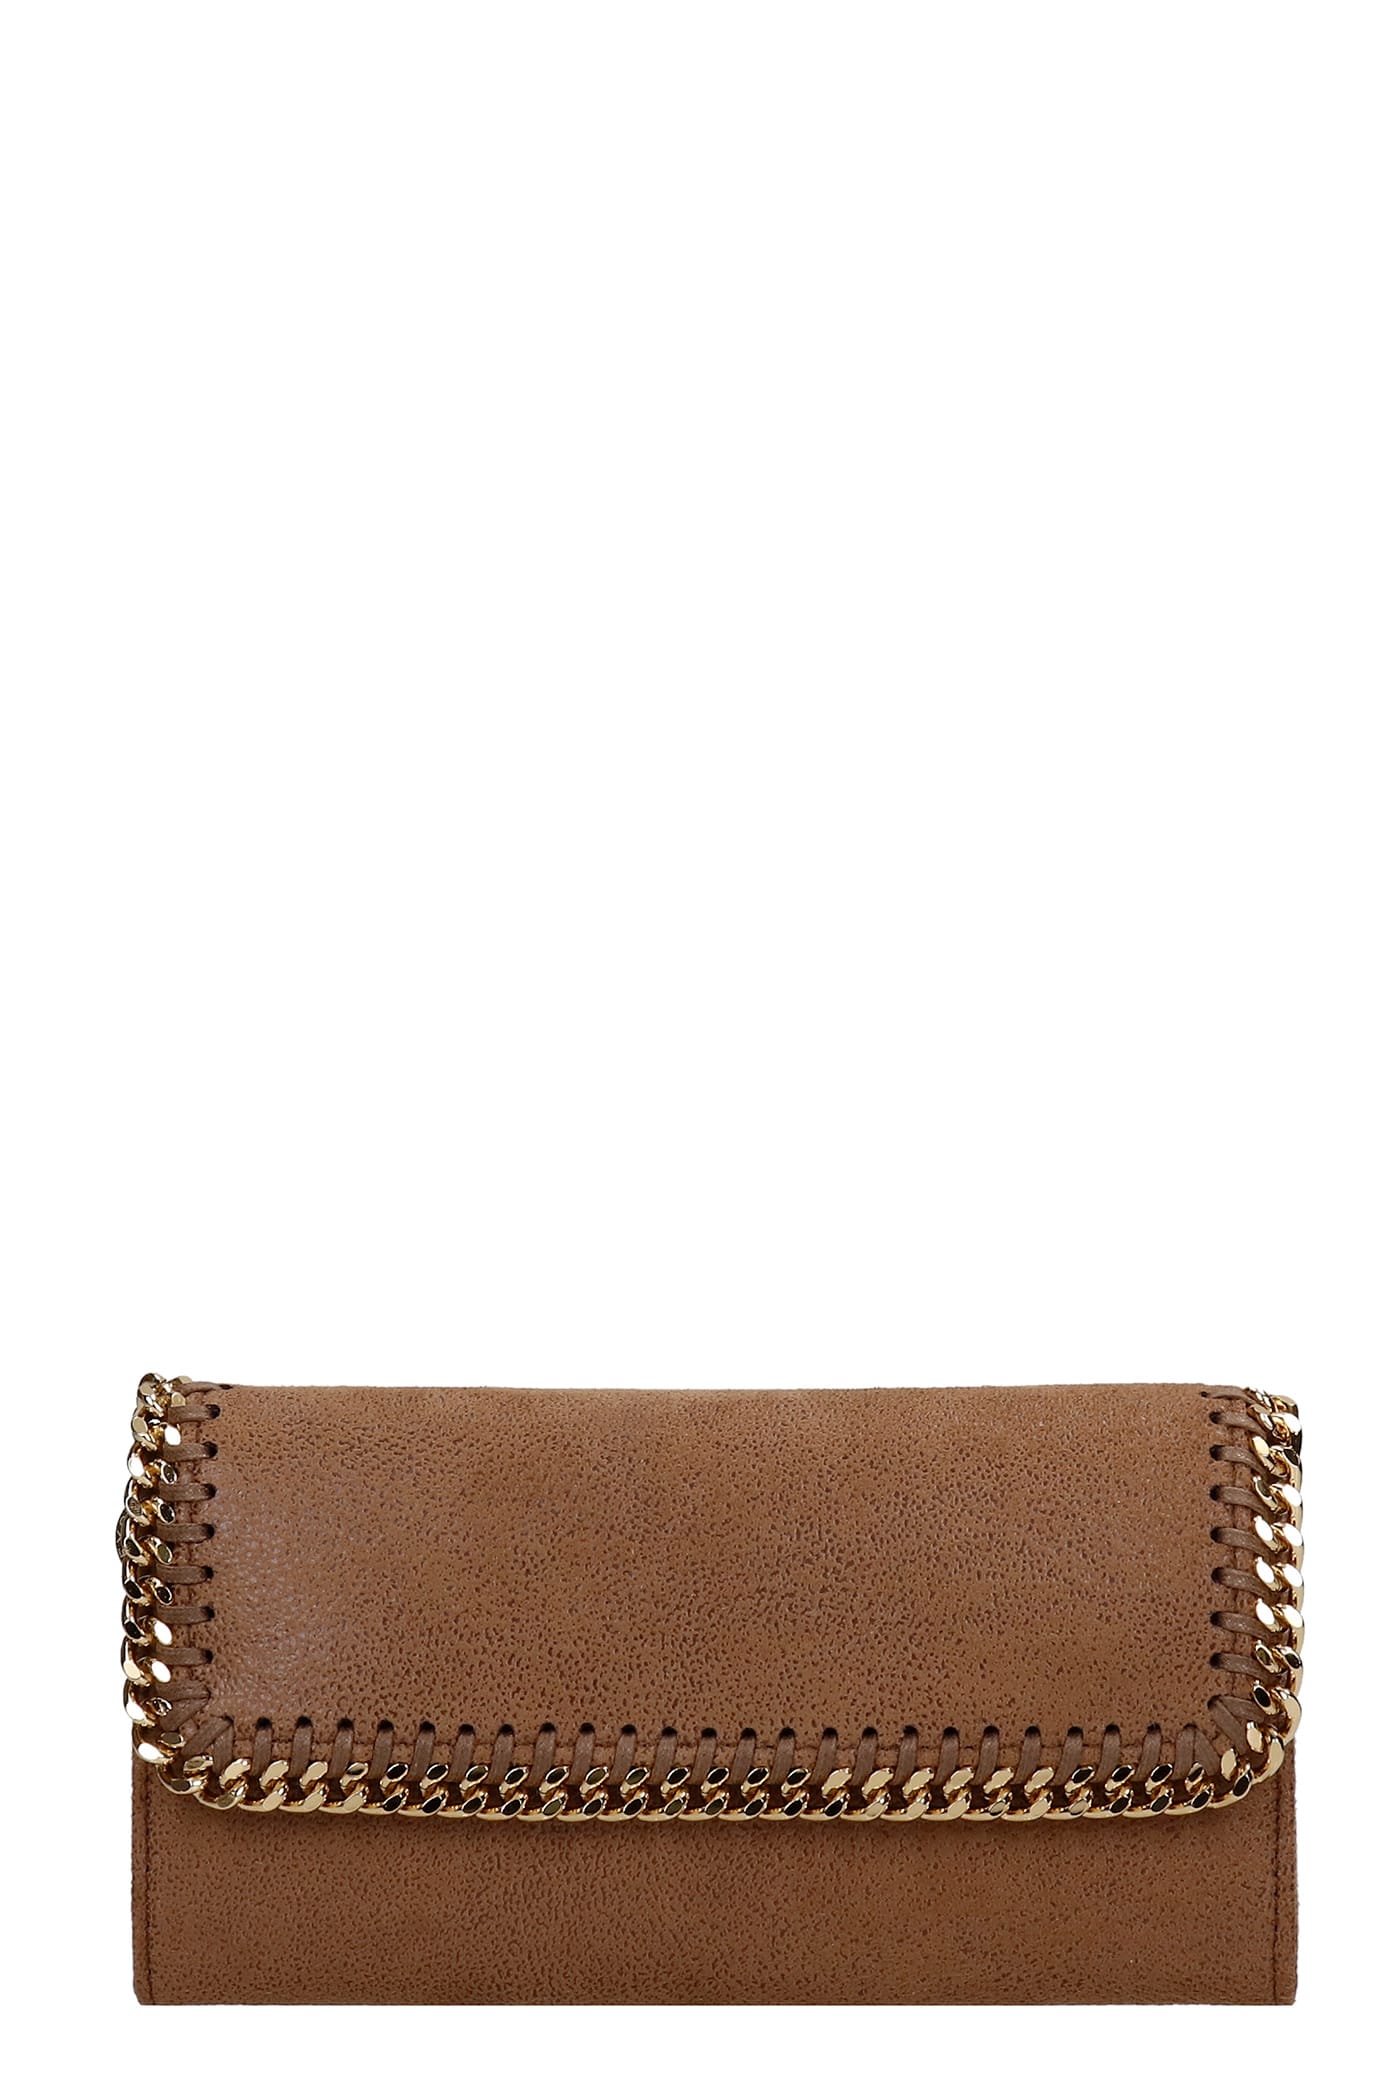 Stella McCartney Wallet In Leather Color Faux Leather